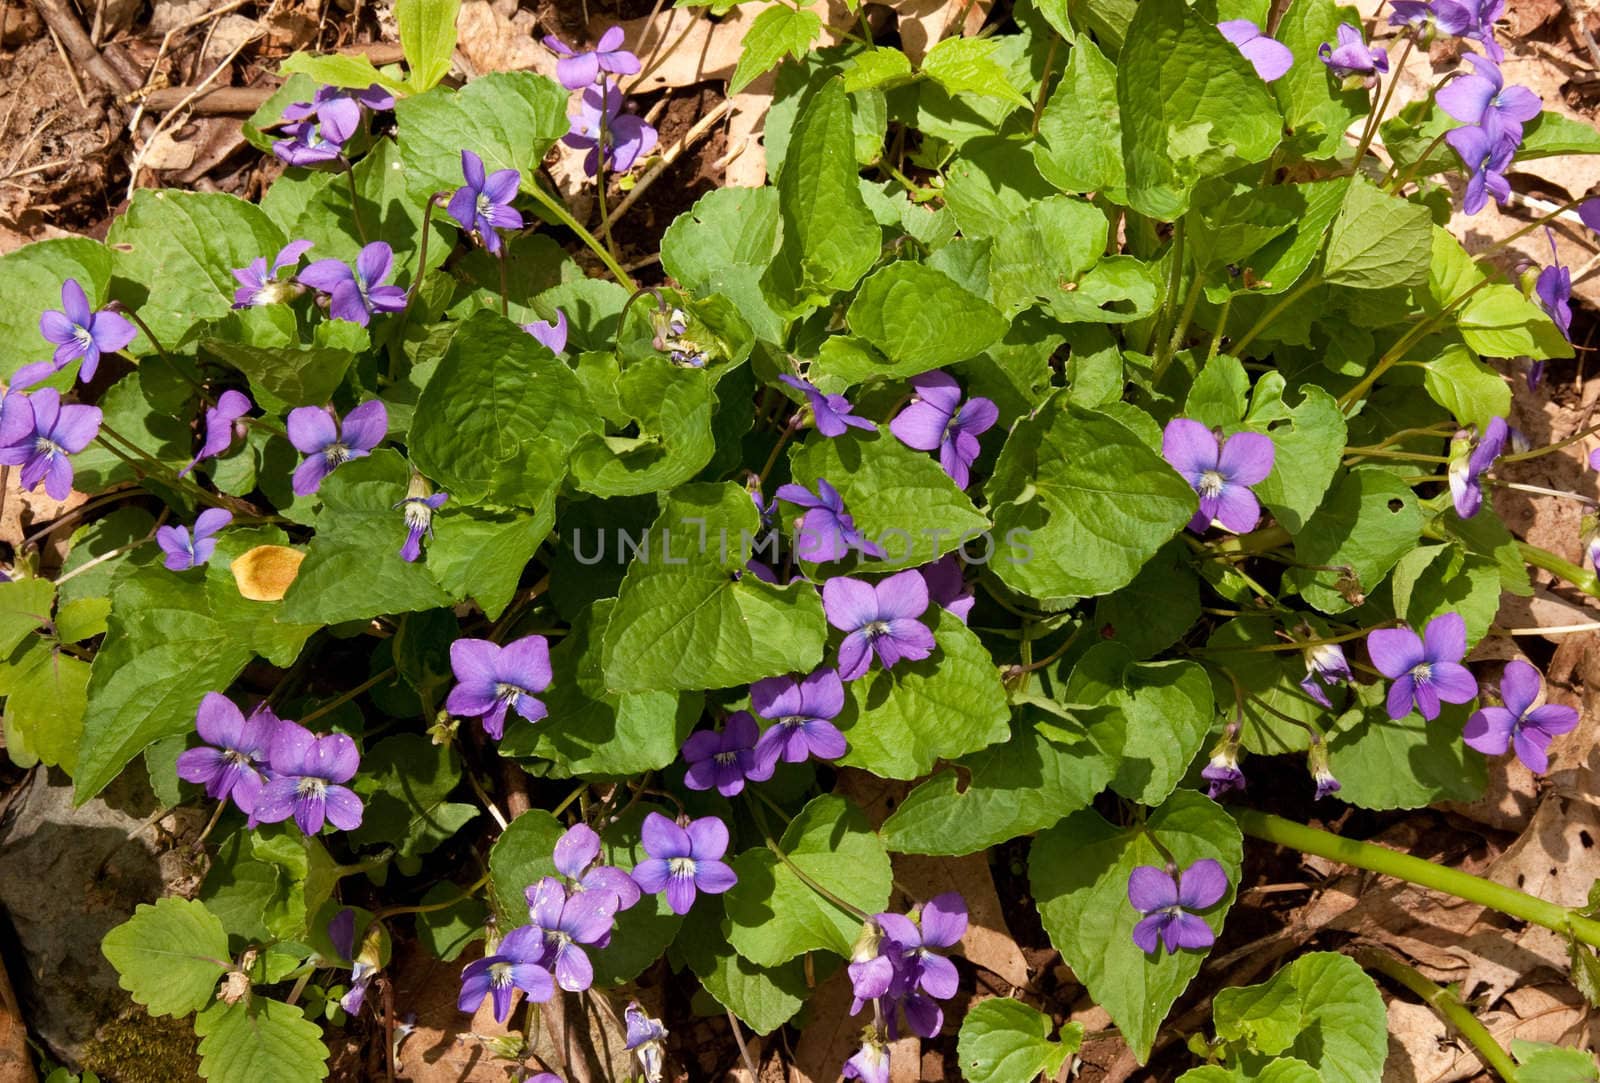 Violets growing wild in forest by steheap